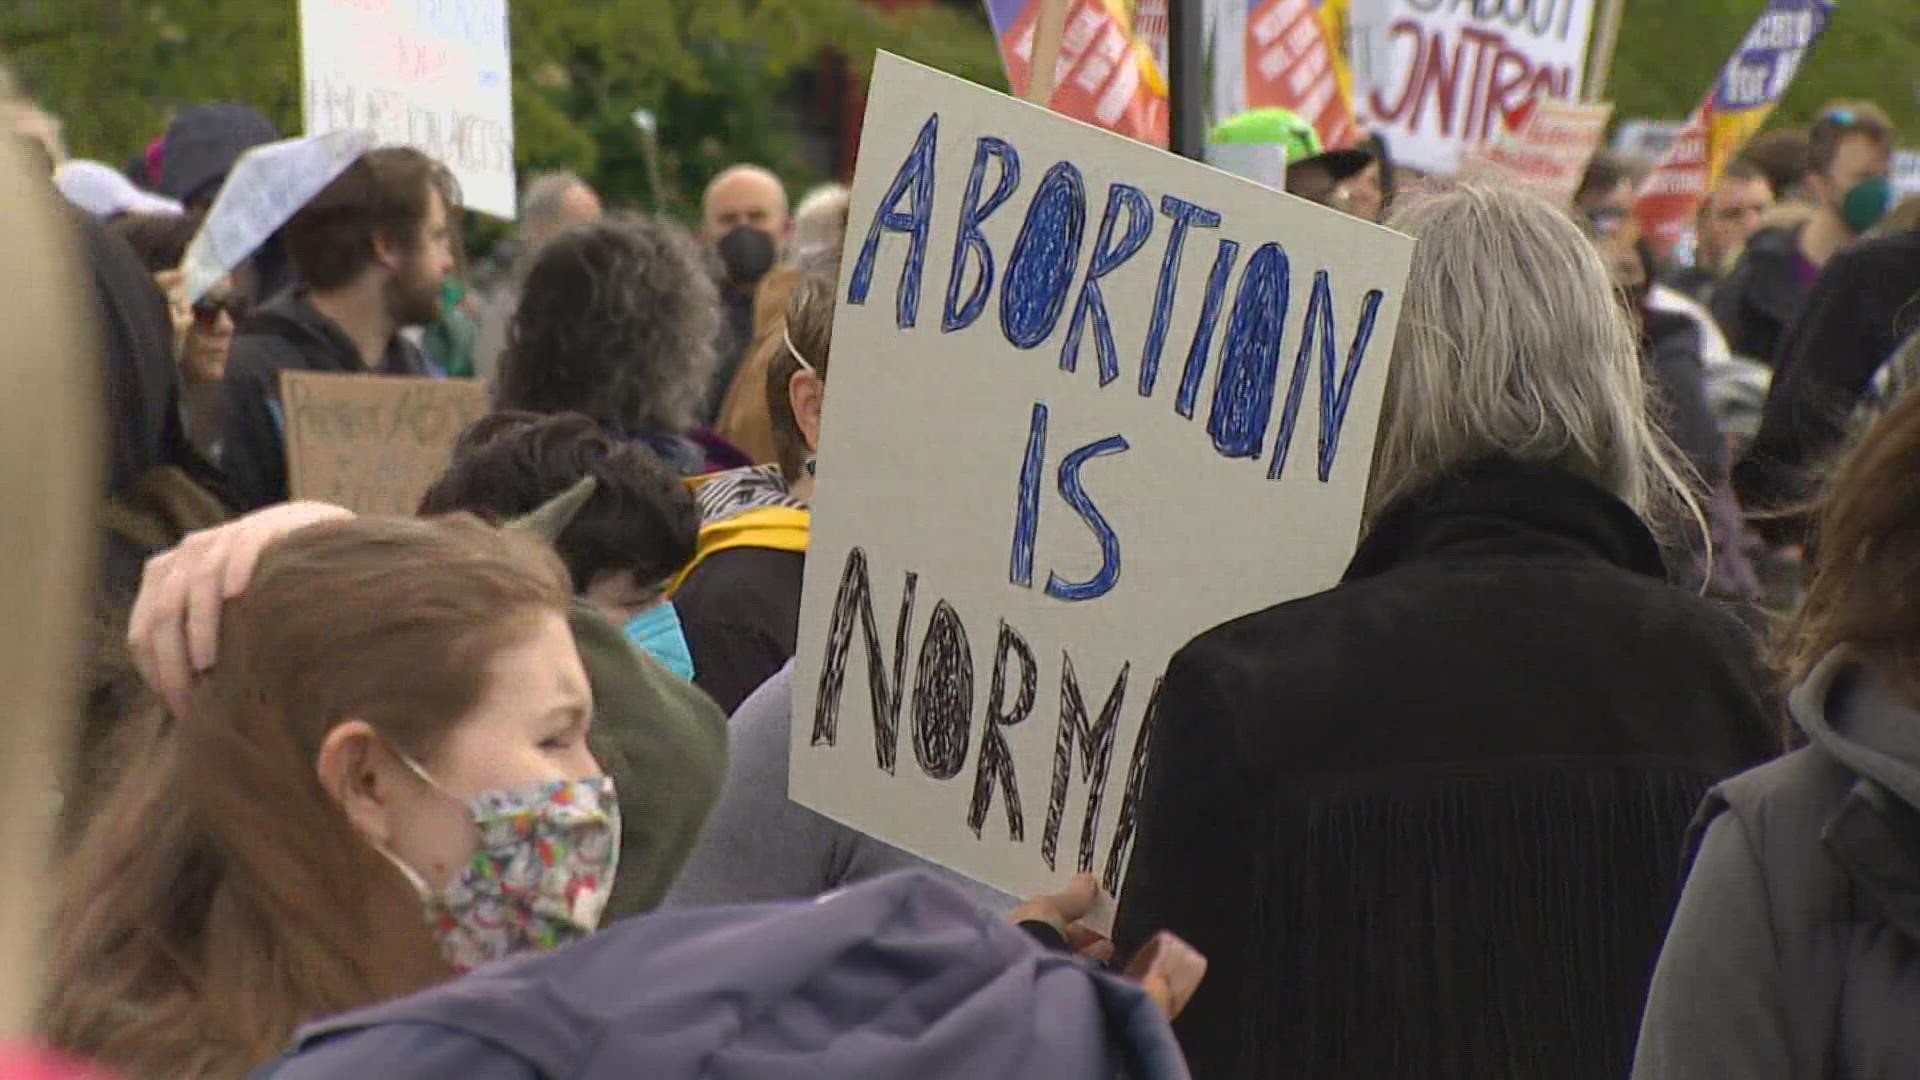 A large contingent of people gathered at Cal Anderson Park to voice their support for federal abortion rights.